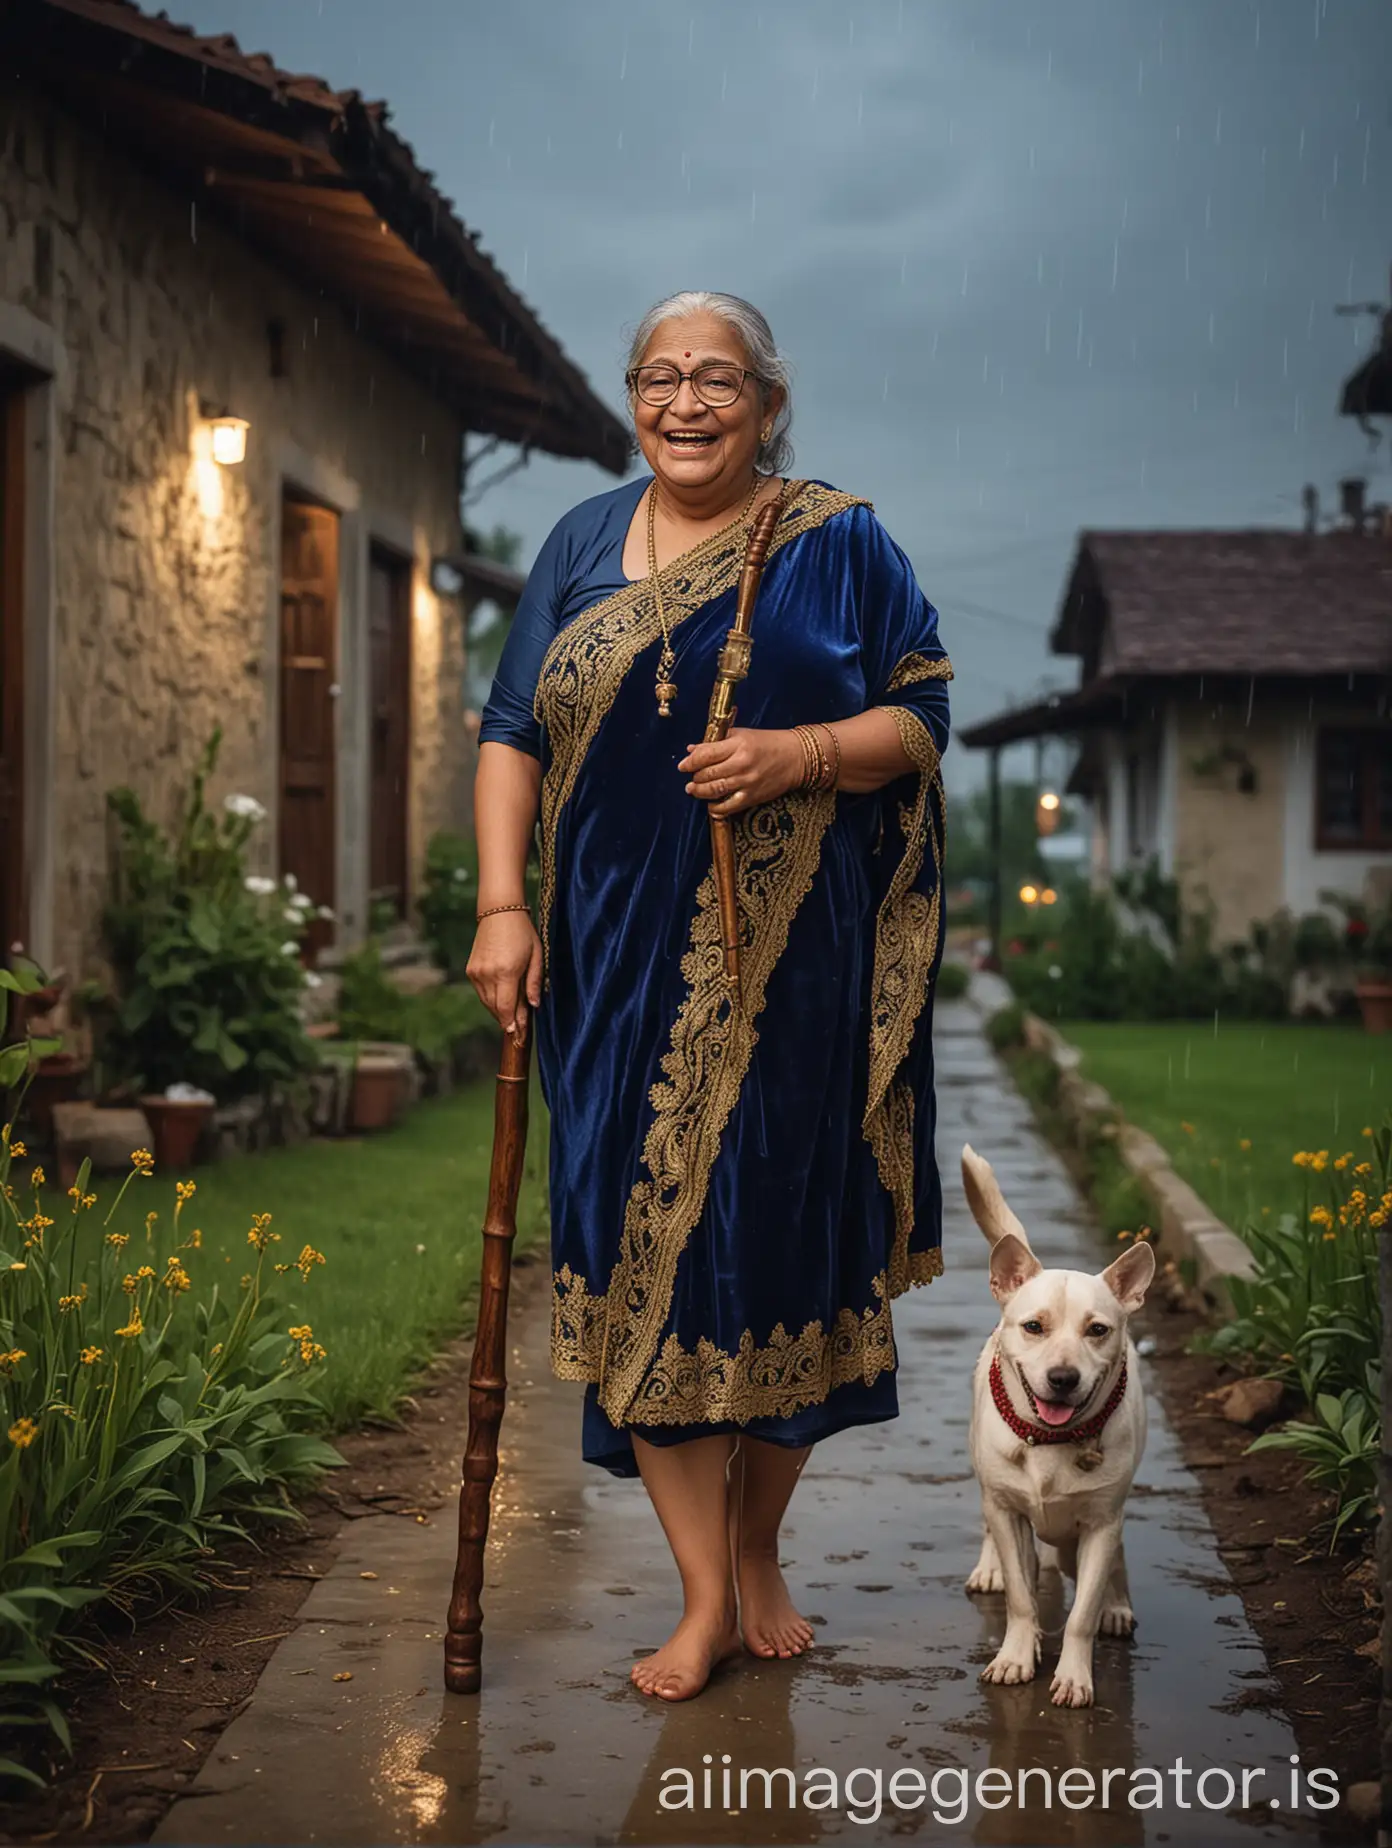 Cheerful-Elderly-Woman-Walking-with-Dog-at-Luxurious-Farmhouse-in-Rainy-Night